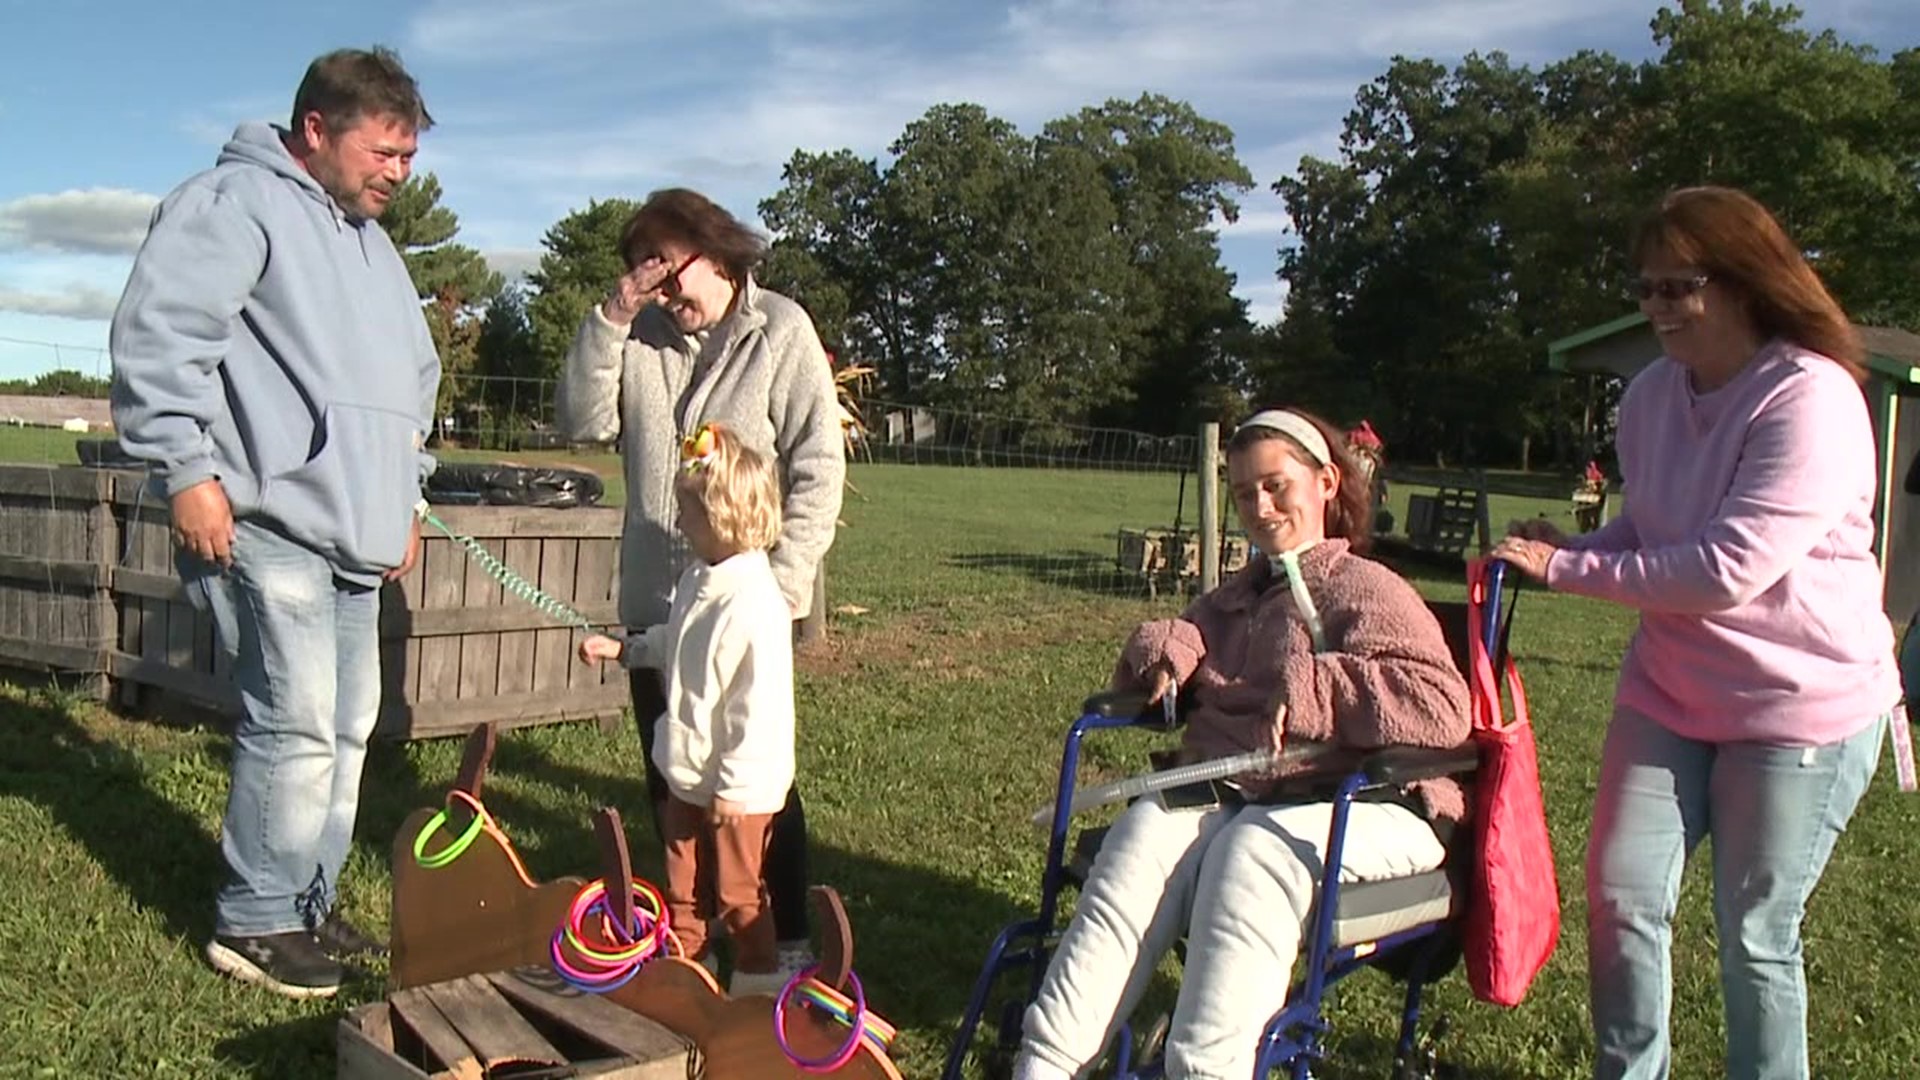 The event at Rohrbach's Farm included wheelchair-accessible hayrides, a corn maze, and a kid's playland.